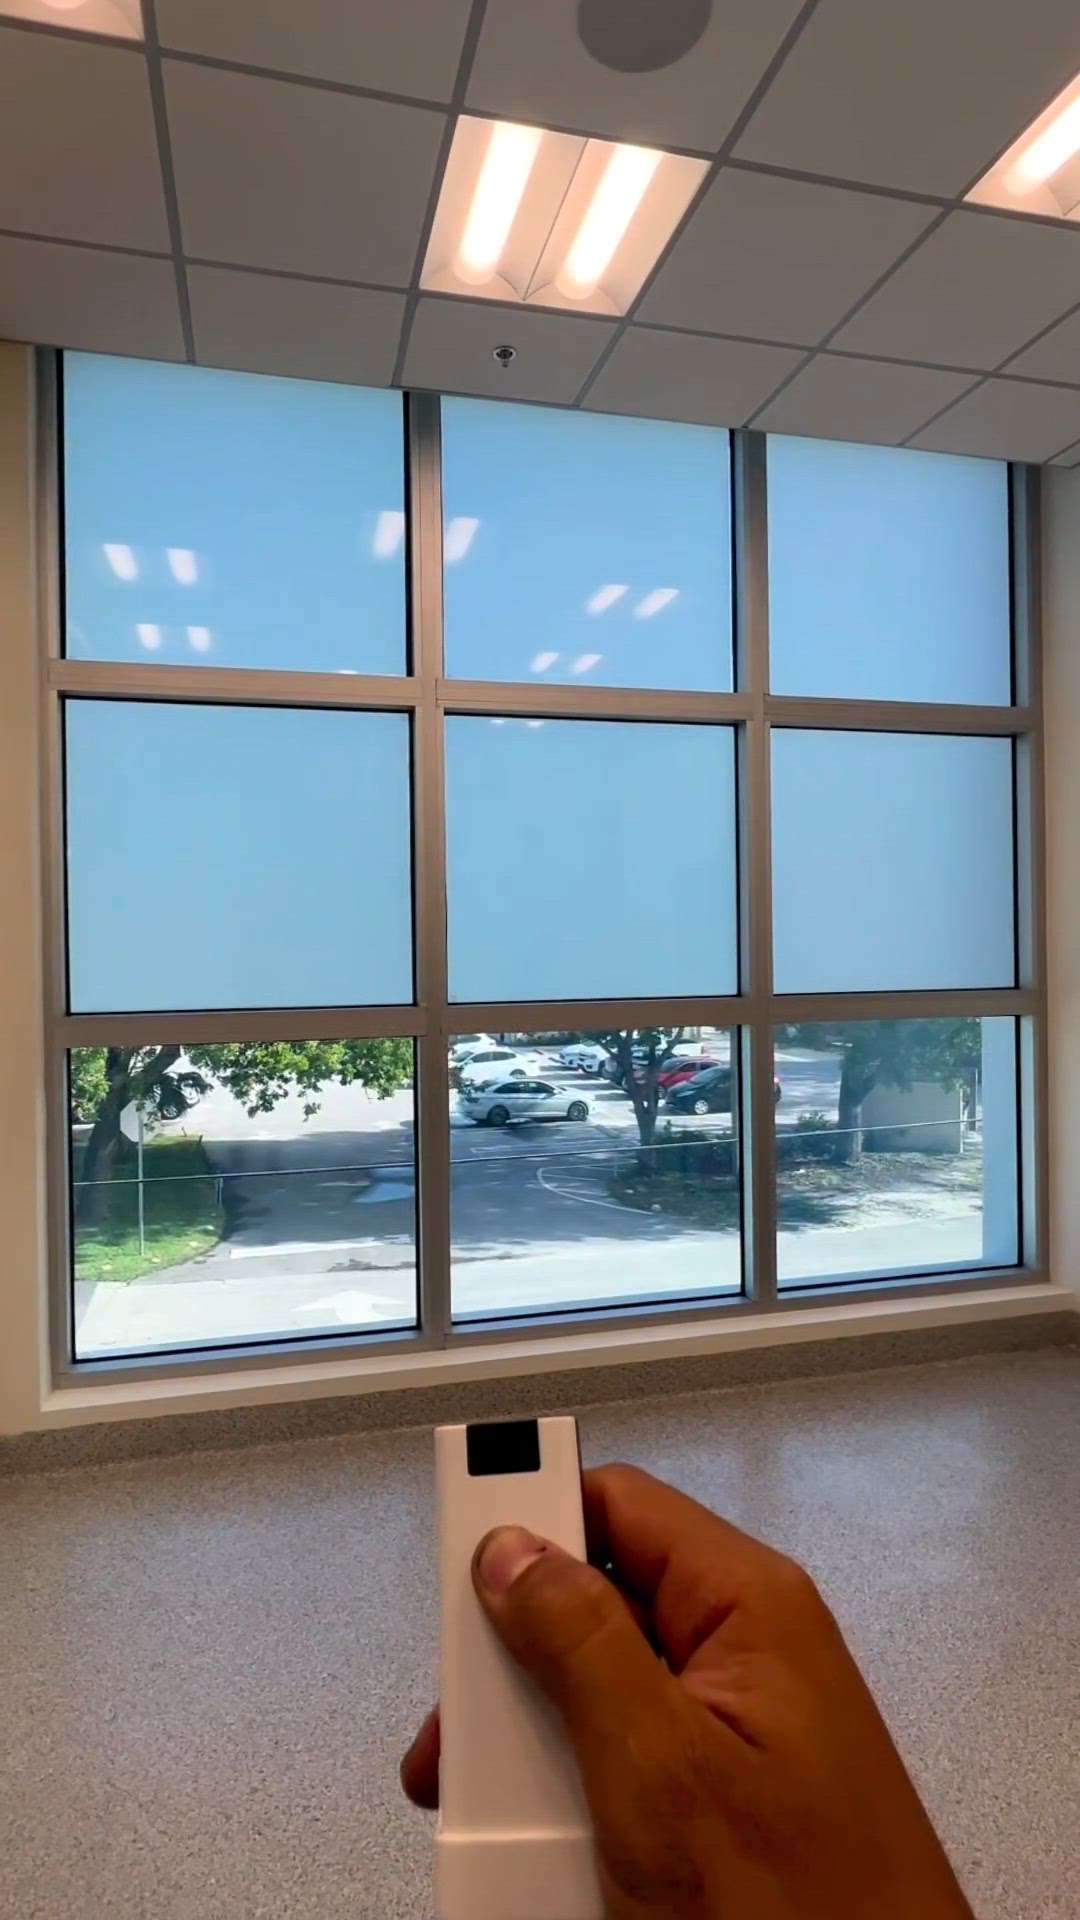 Switchable film.
Just one click, transparent and blurred.
Contact smart Home Experts
7206928056 #switchablefilm #smarthomeexperts #homeautomationsystems